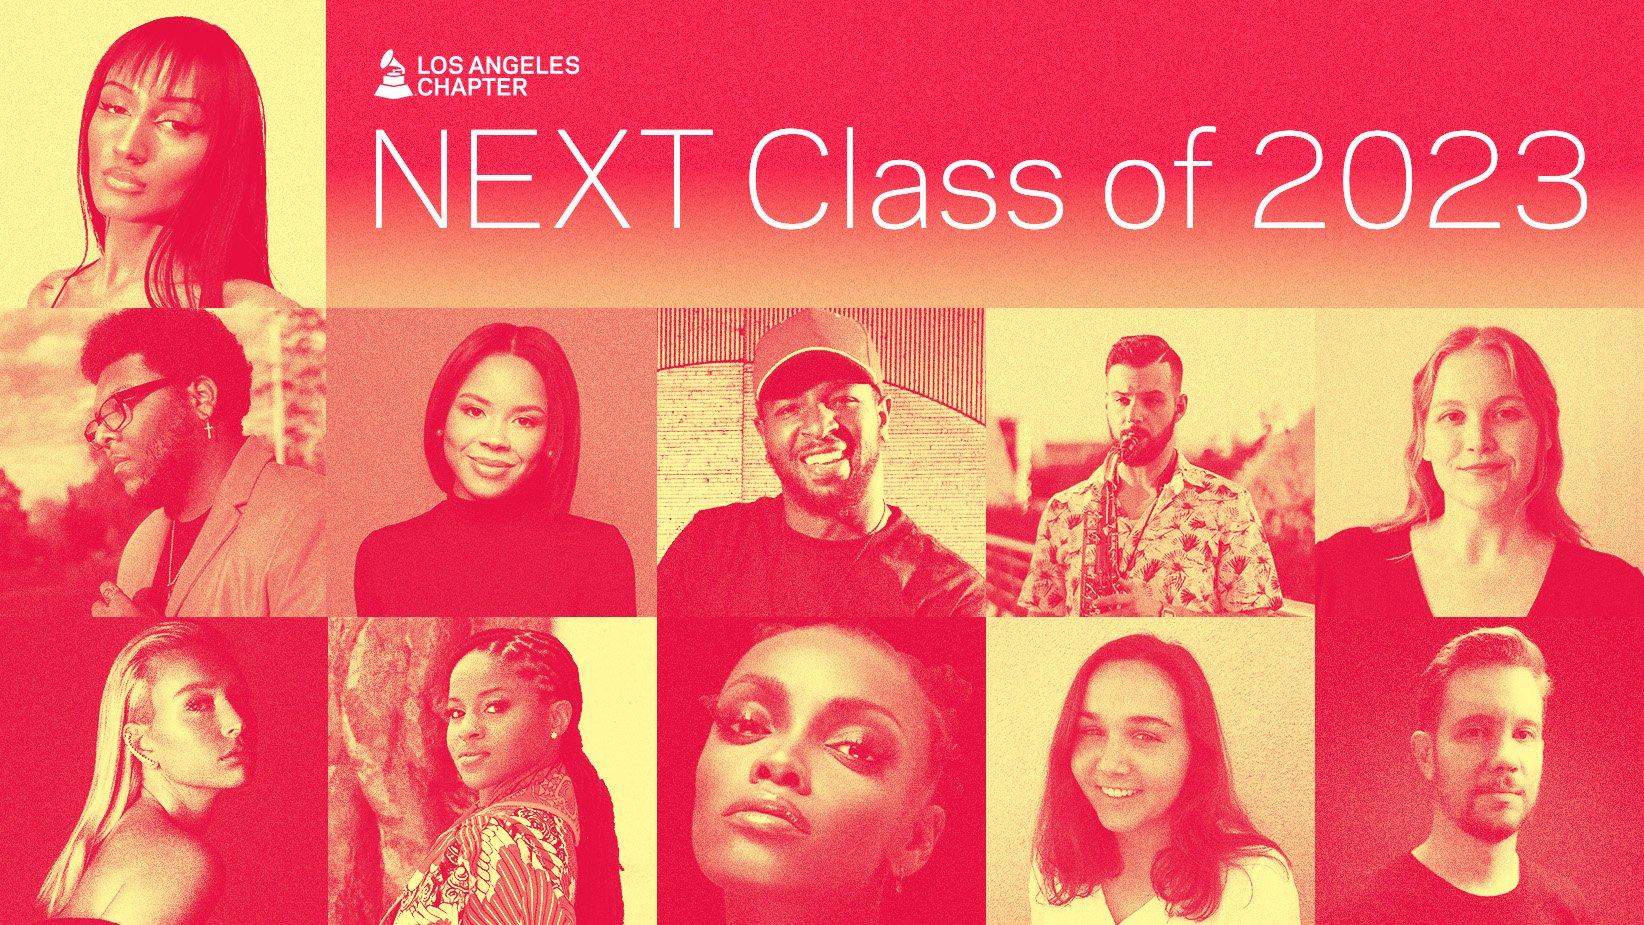 Graphic featuring images of the Recording Academy Los Angeles Chapter's NEXT Class of 2023 participants